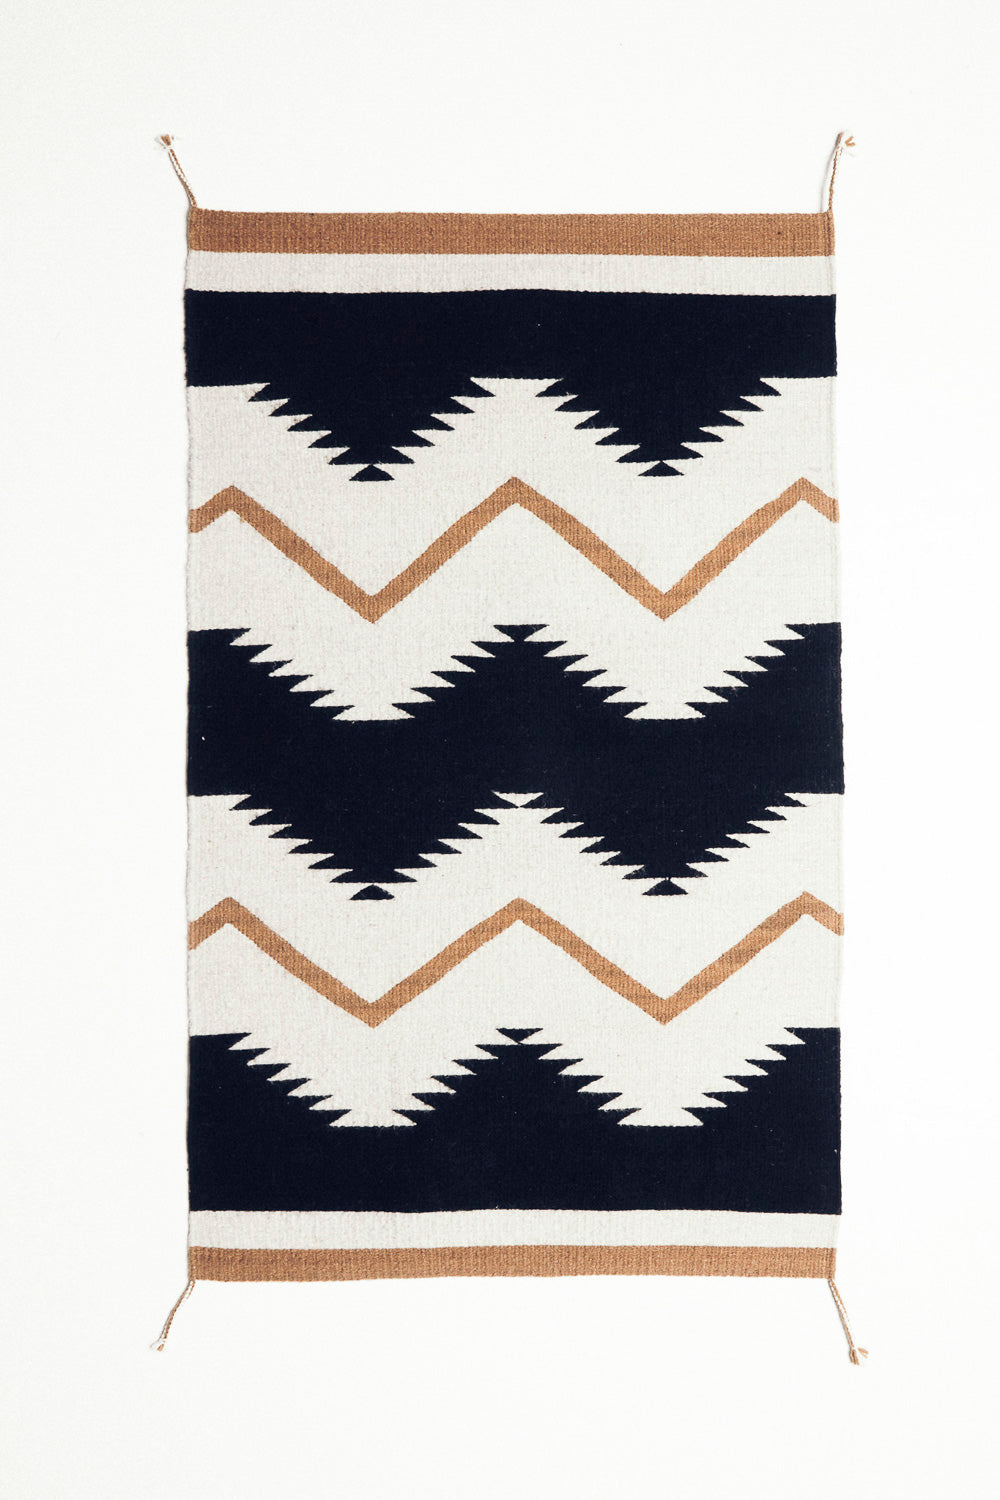 The Camel Loom Woven Tapestry - 3 Sizes Available